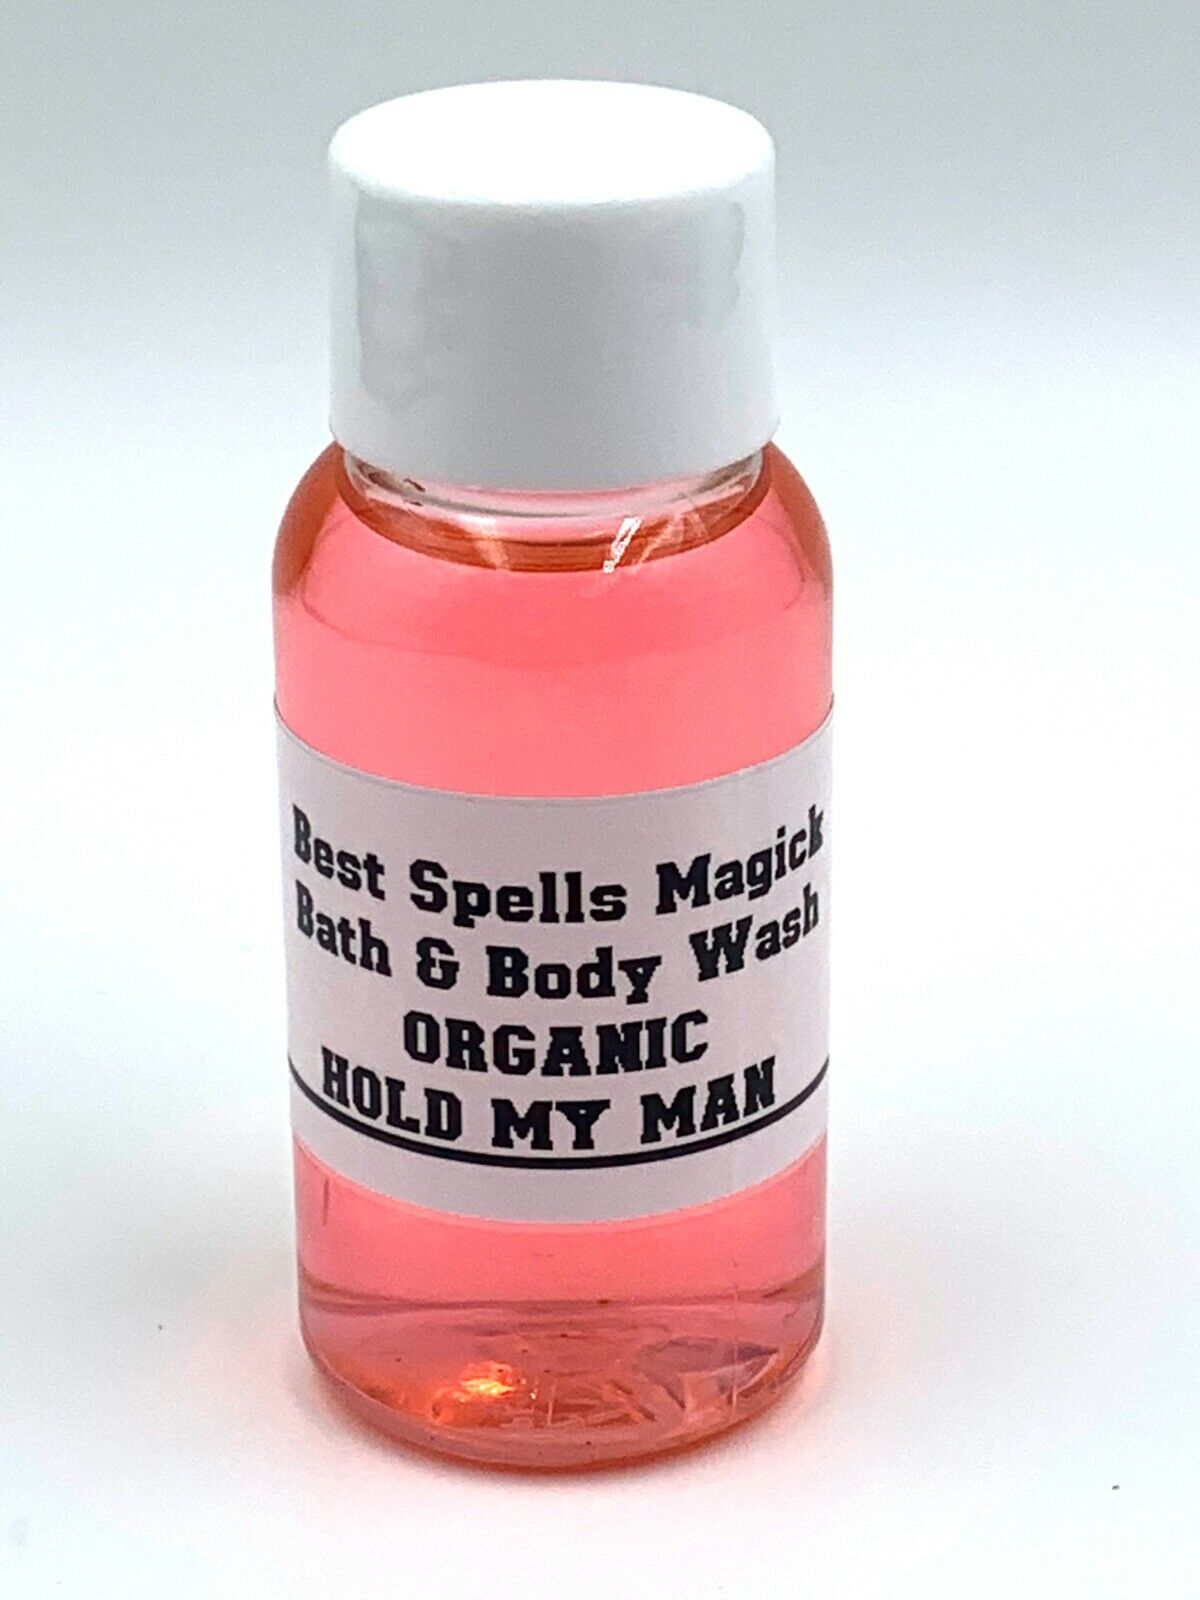 HOLD MY MAN Organic Spiritual Blessed Body Wash Best Spells Magick Product